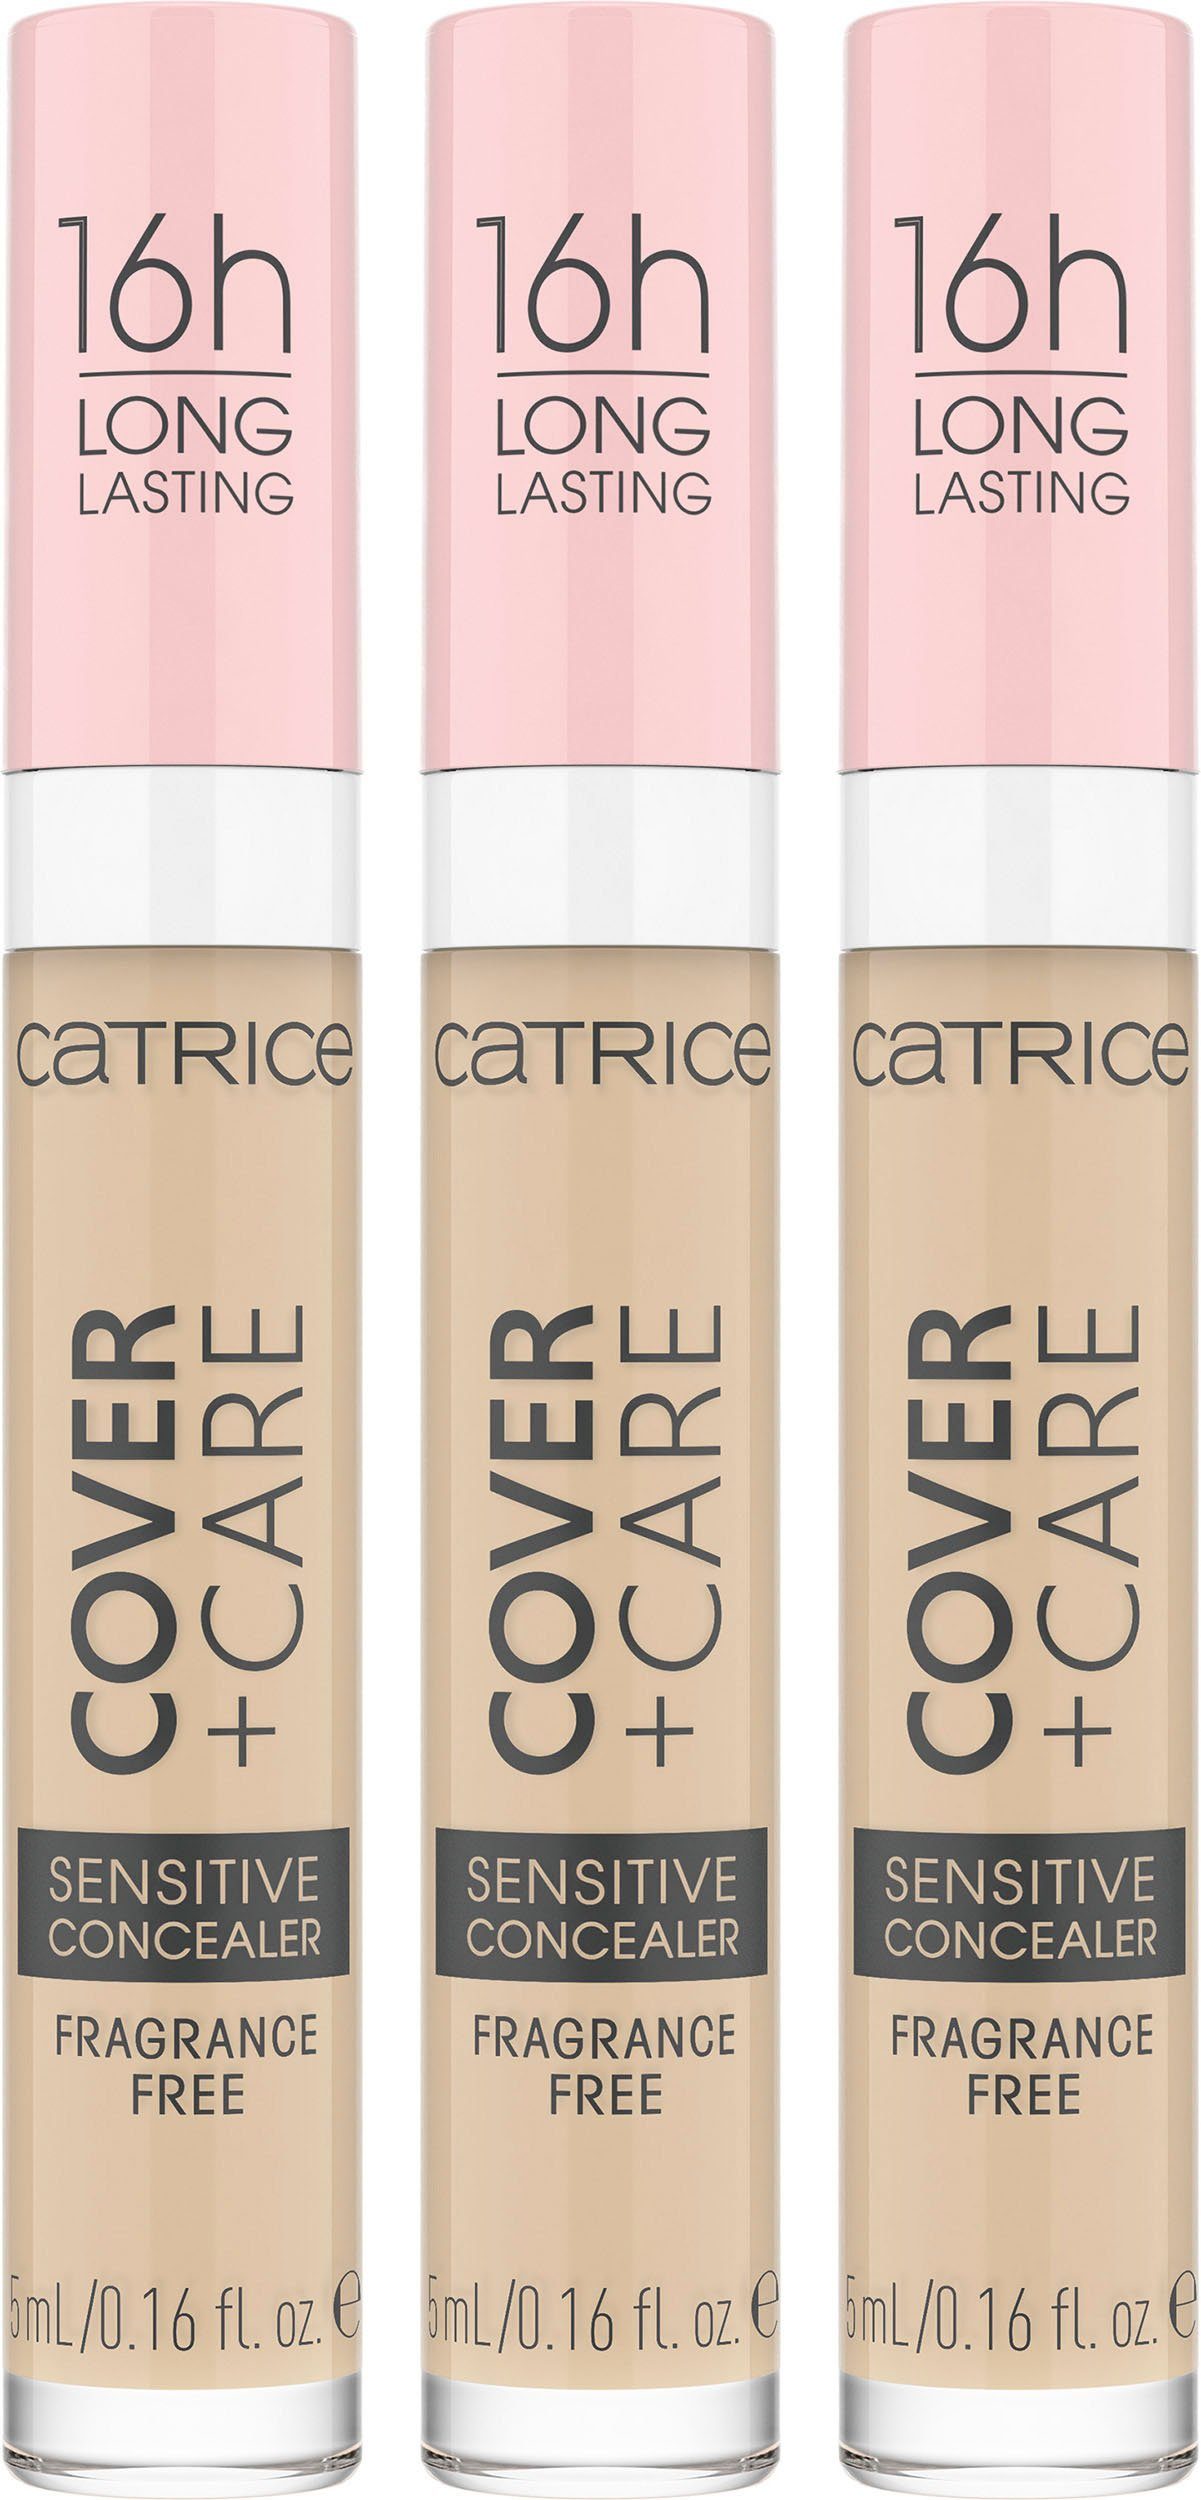 Concealer Sensitive Care Concealer, Catrice Catrice Cover +